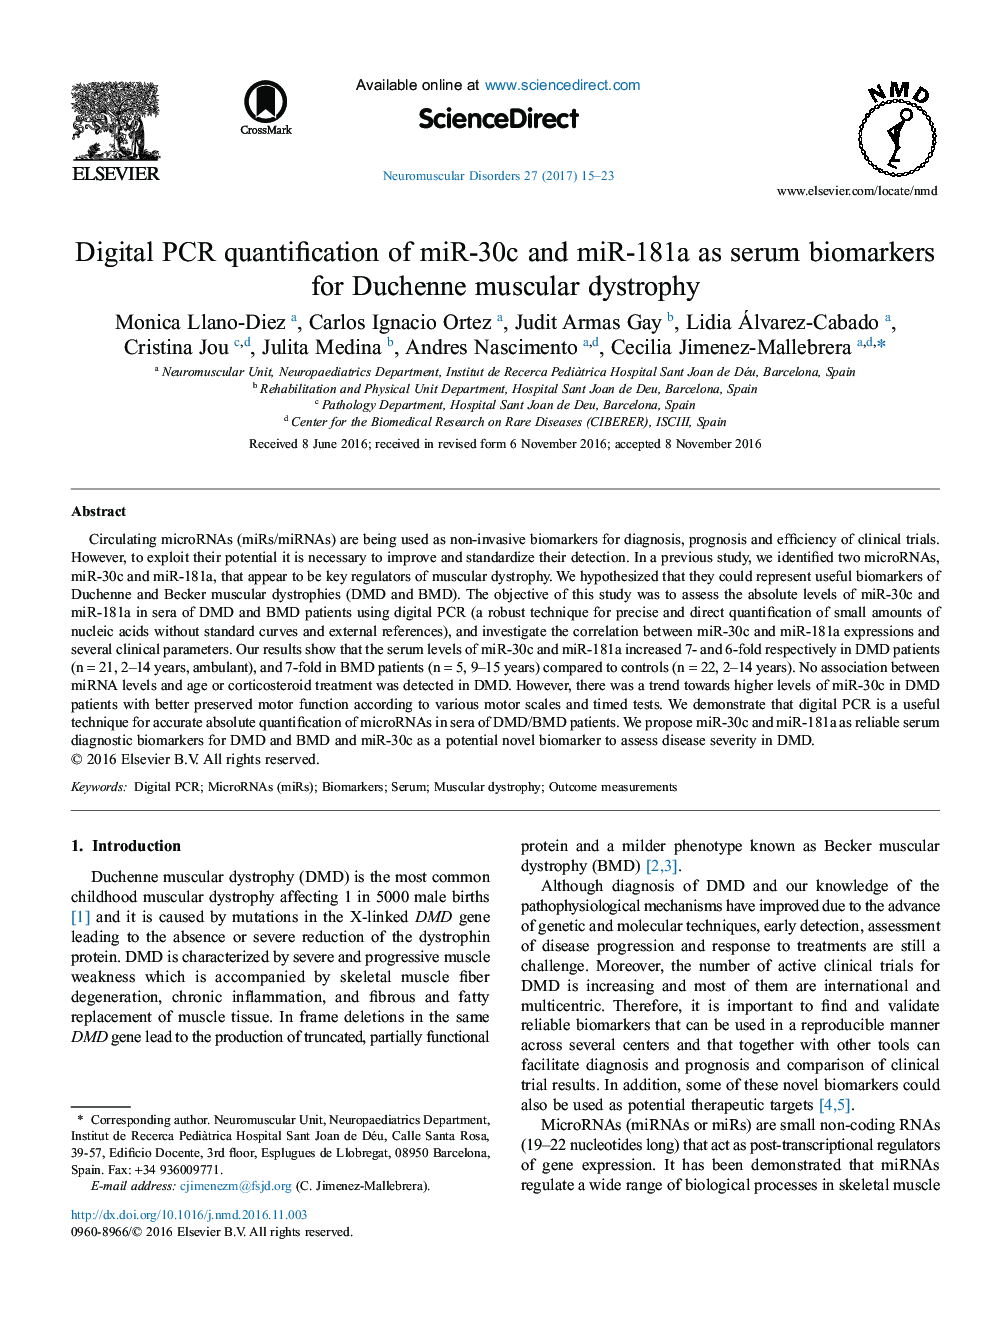 Digital PCR quantification of miR-30c and miR-181a as serum biomarkers for Duchenne muscular dystrophy